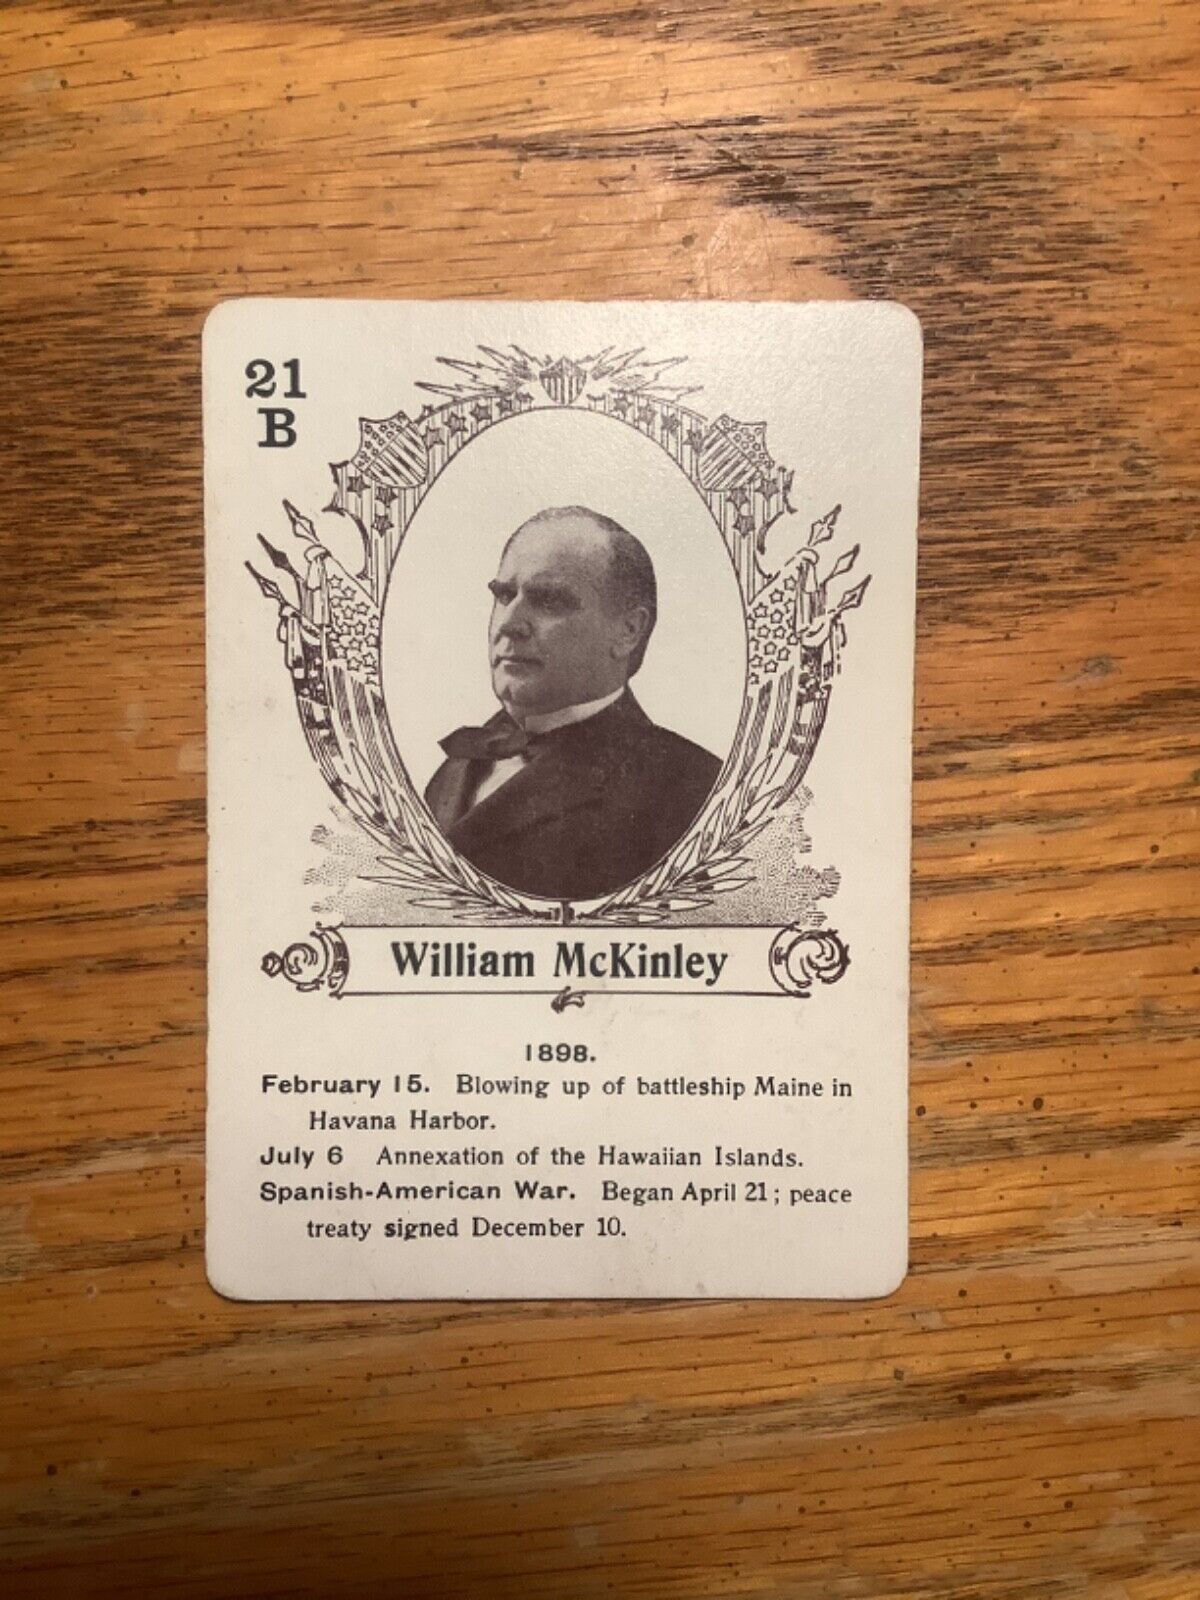 Vintage 1905 Rare William McKinley In The White House Game Card #21B - Ex